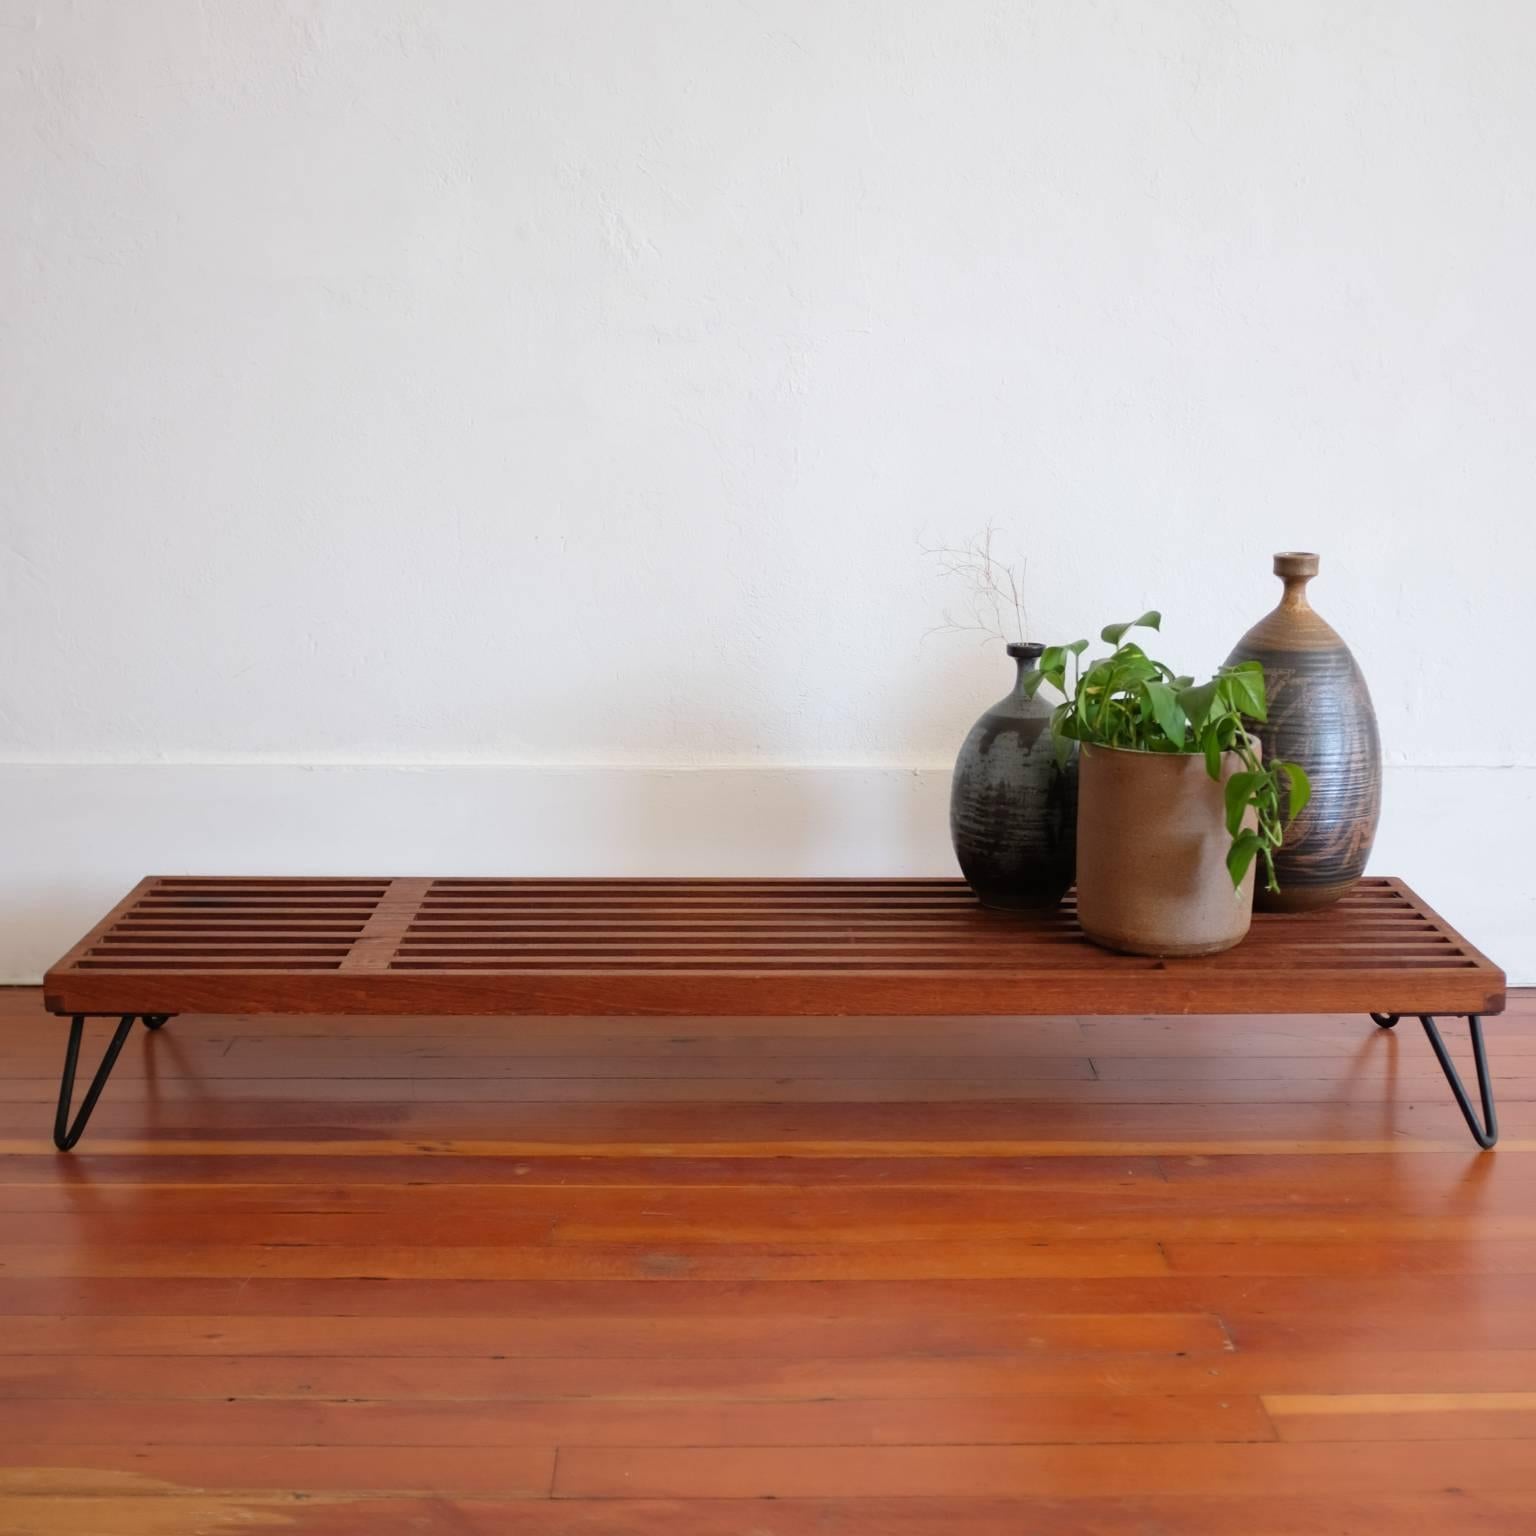 Slatted wood display tables with iron legs from the 1950s. Japanese-influenced design. The low long table was used for a television by the original owner. They can be used as stands or plinths to display art, ceramics or plants. Solid wood